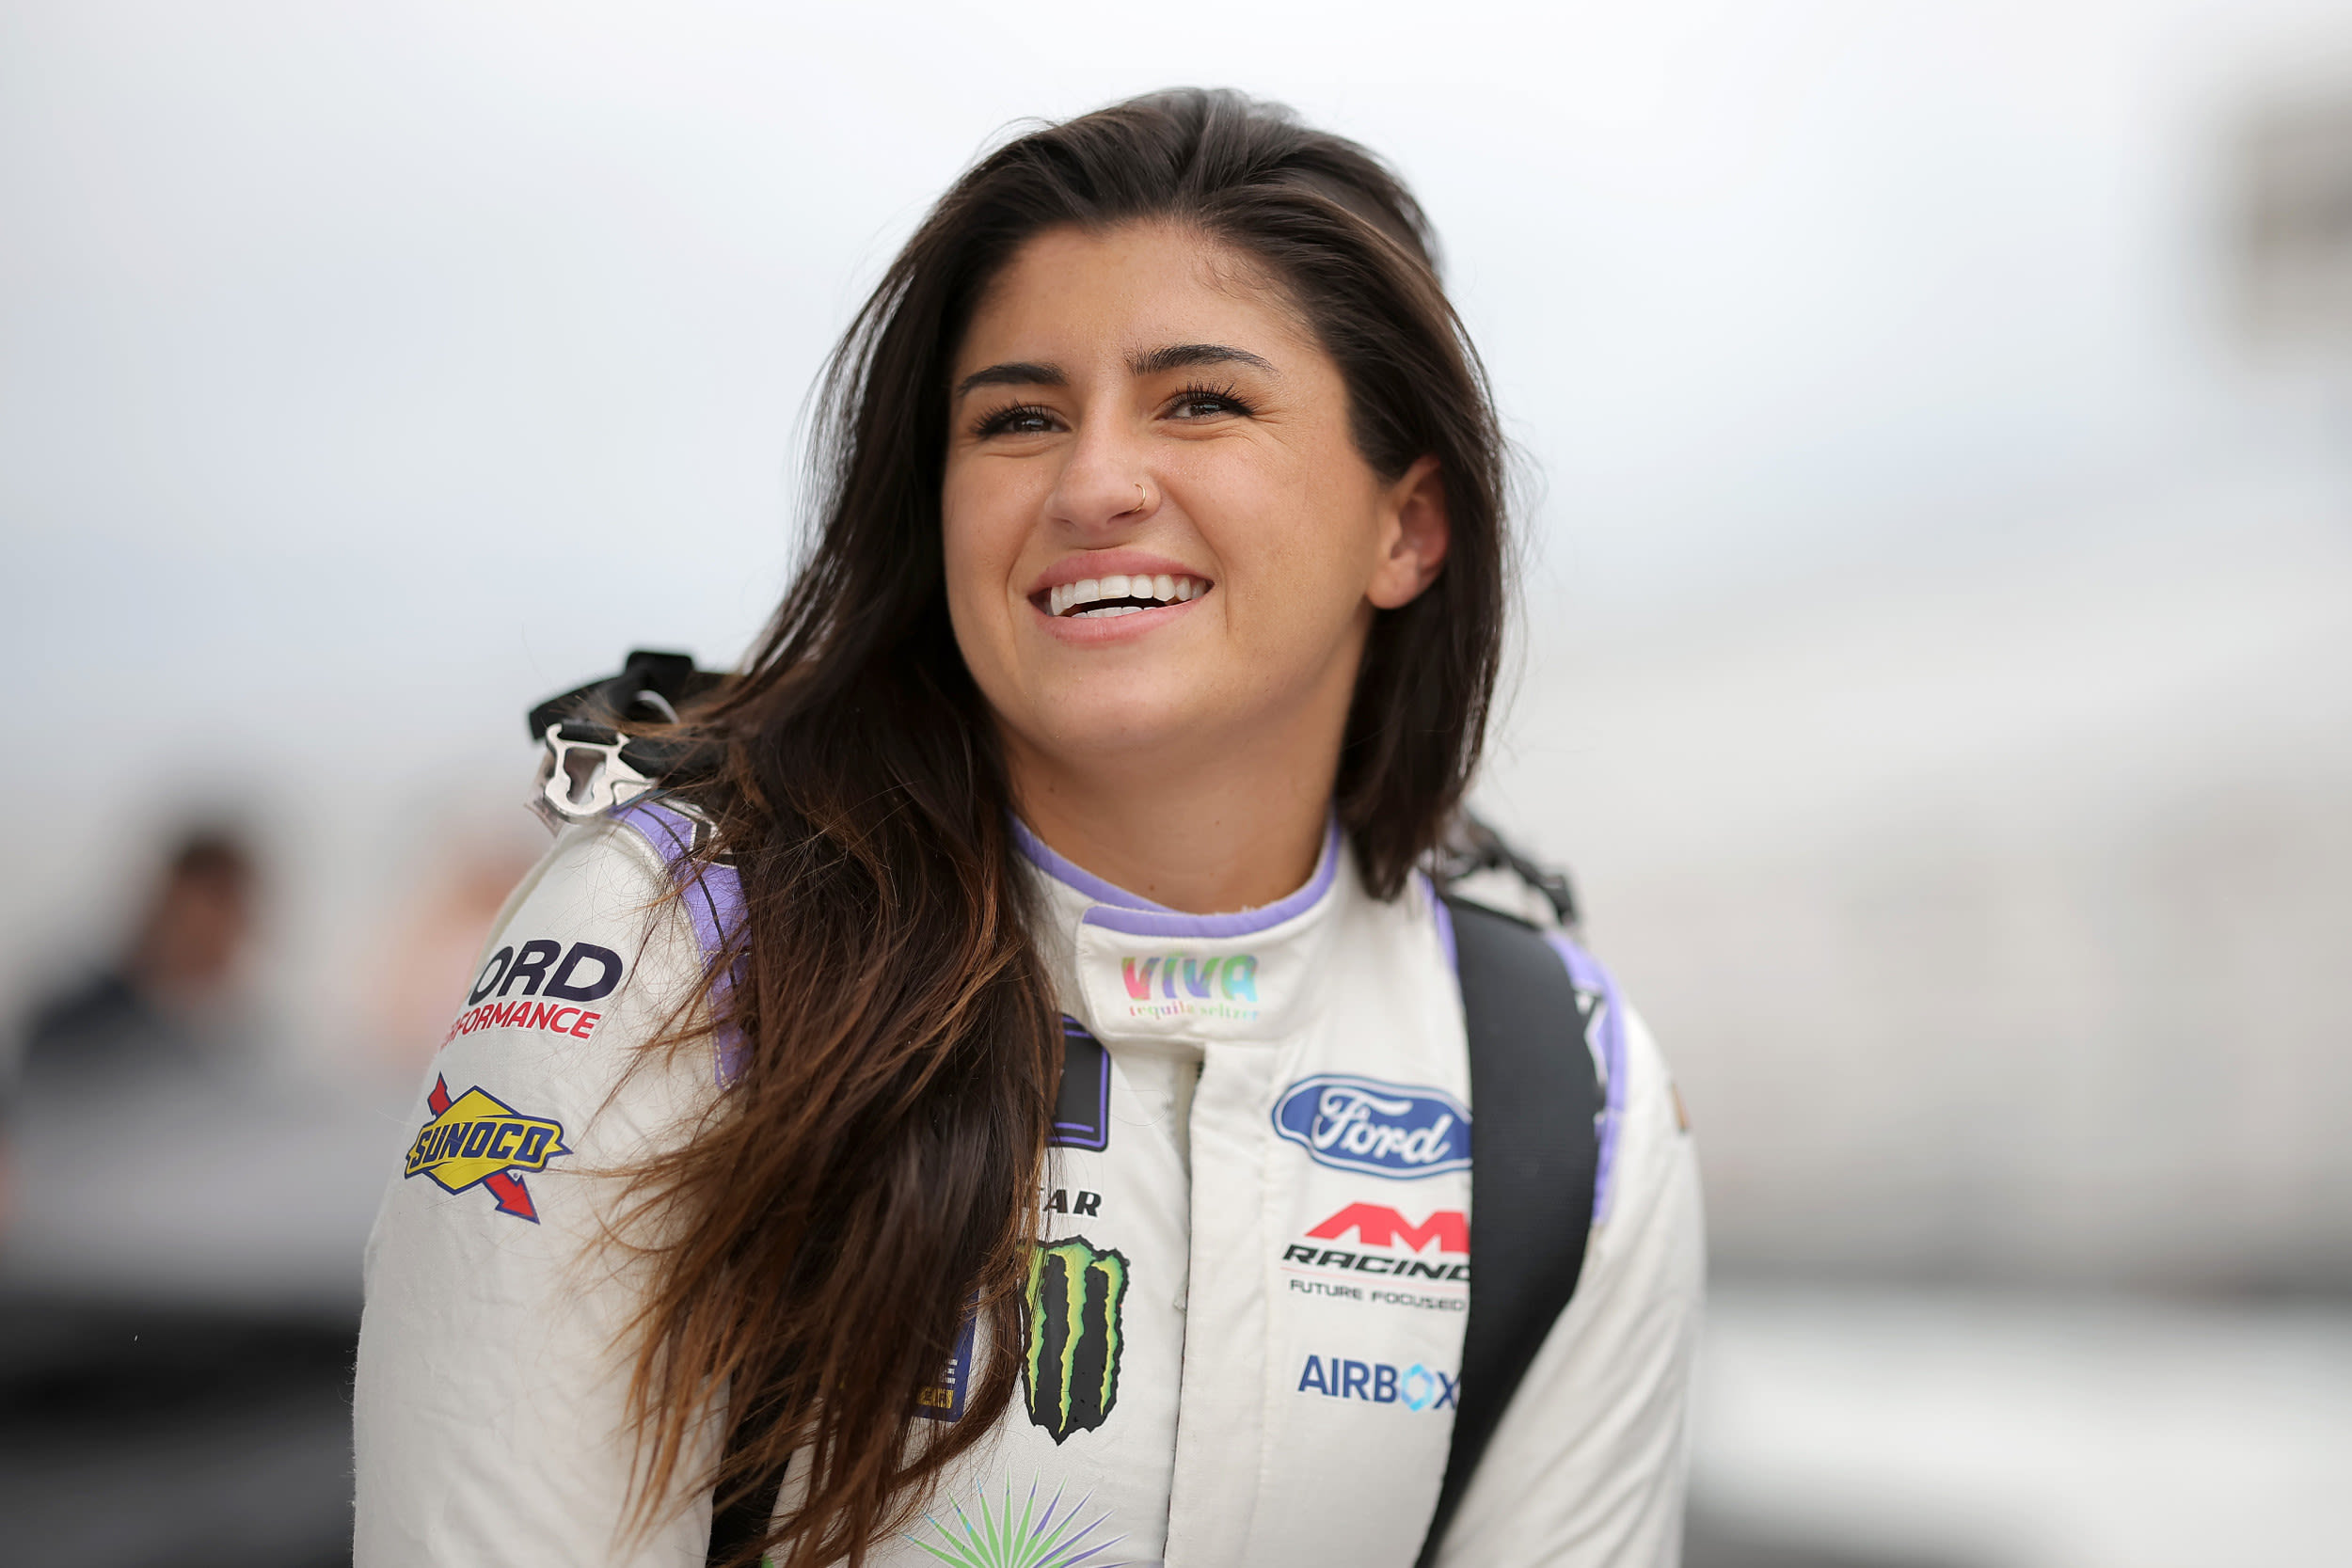 Hailie Deegan Appearance Sparks Career Move Rumors After AM Racing Exit